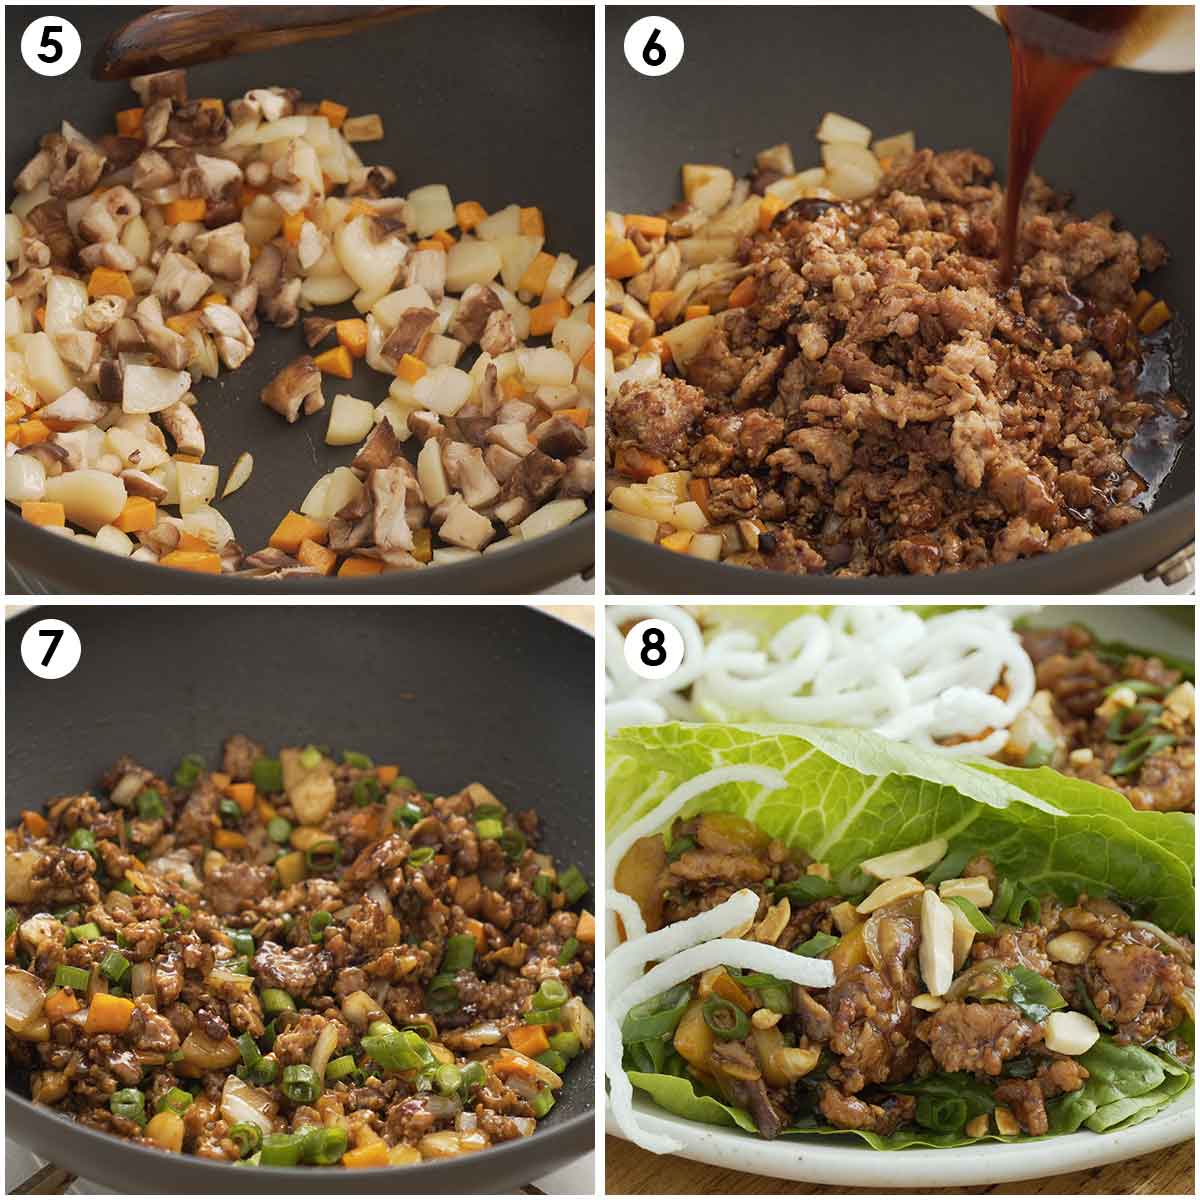 4 image collage showing how to stir fry vegetables with mince chicken and how to assemble the lettuce wrap.